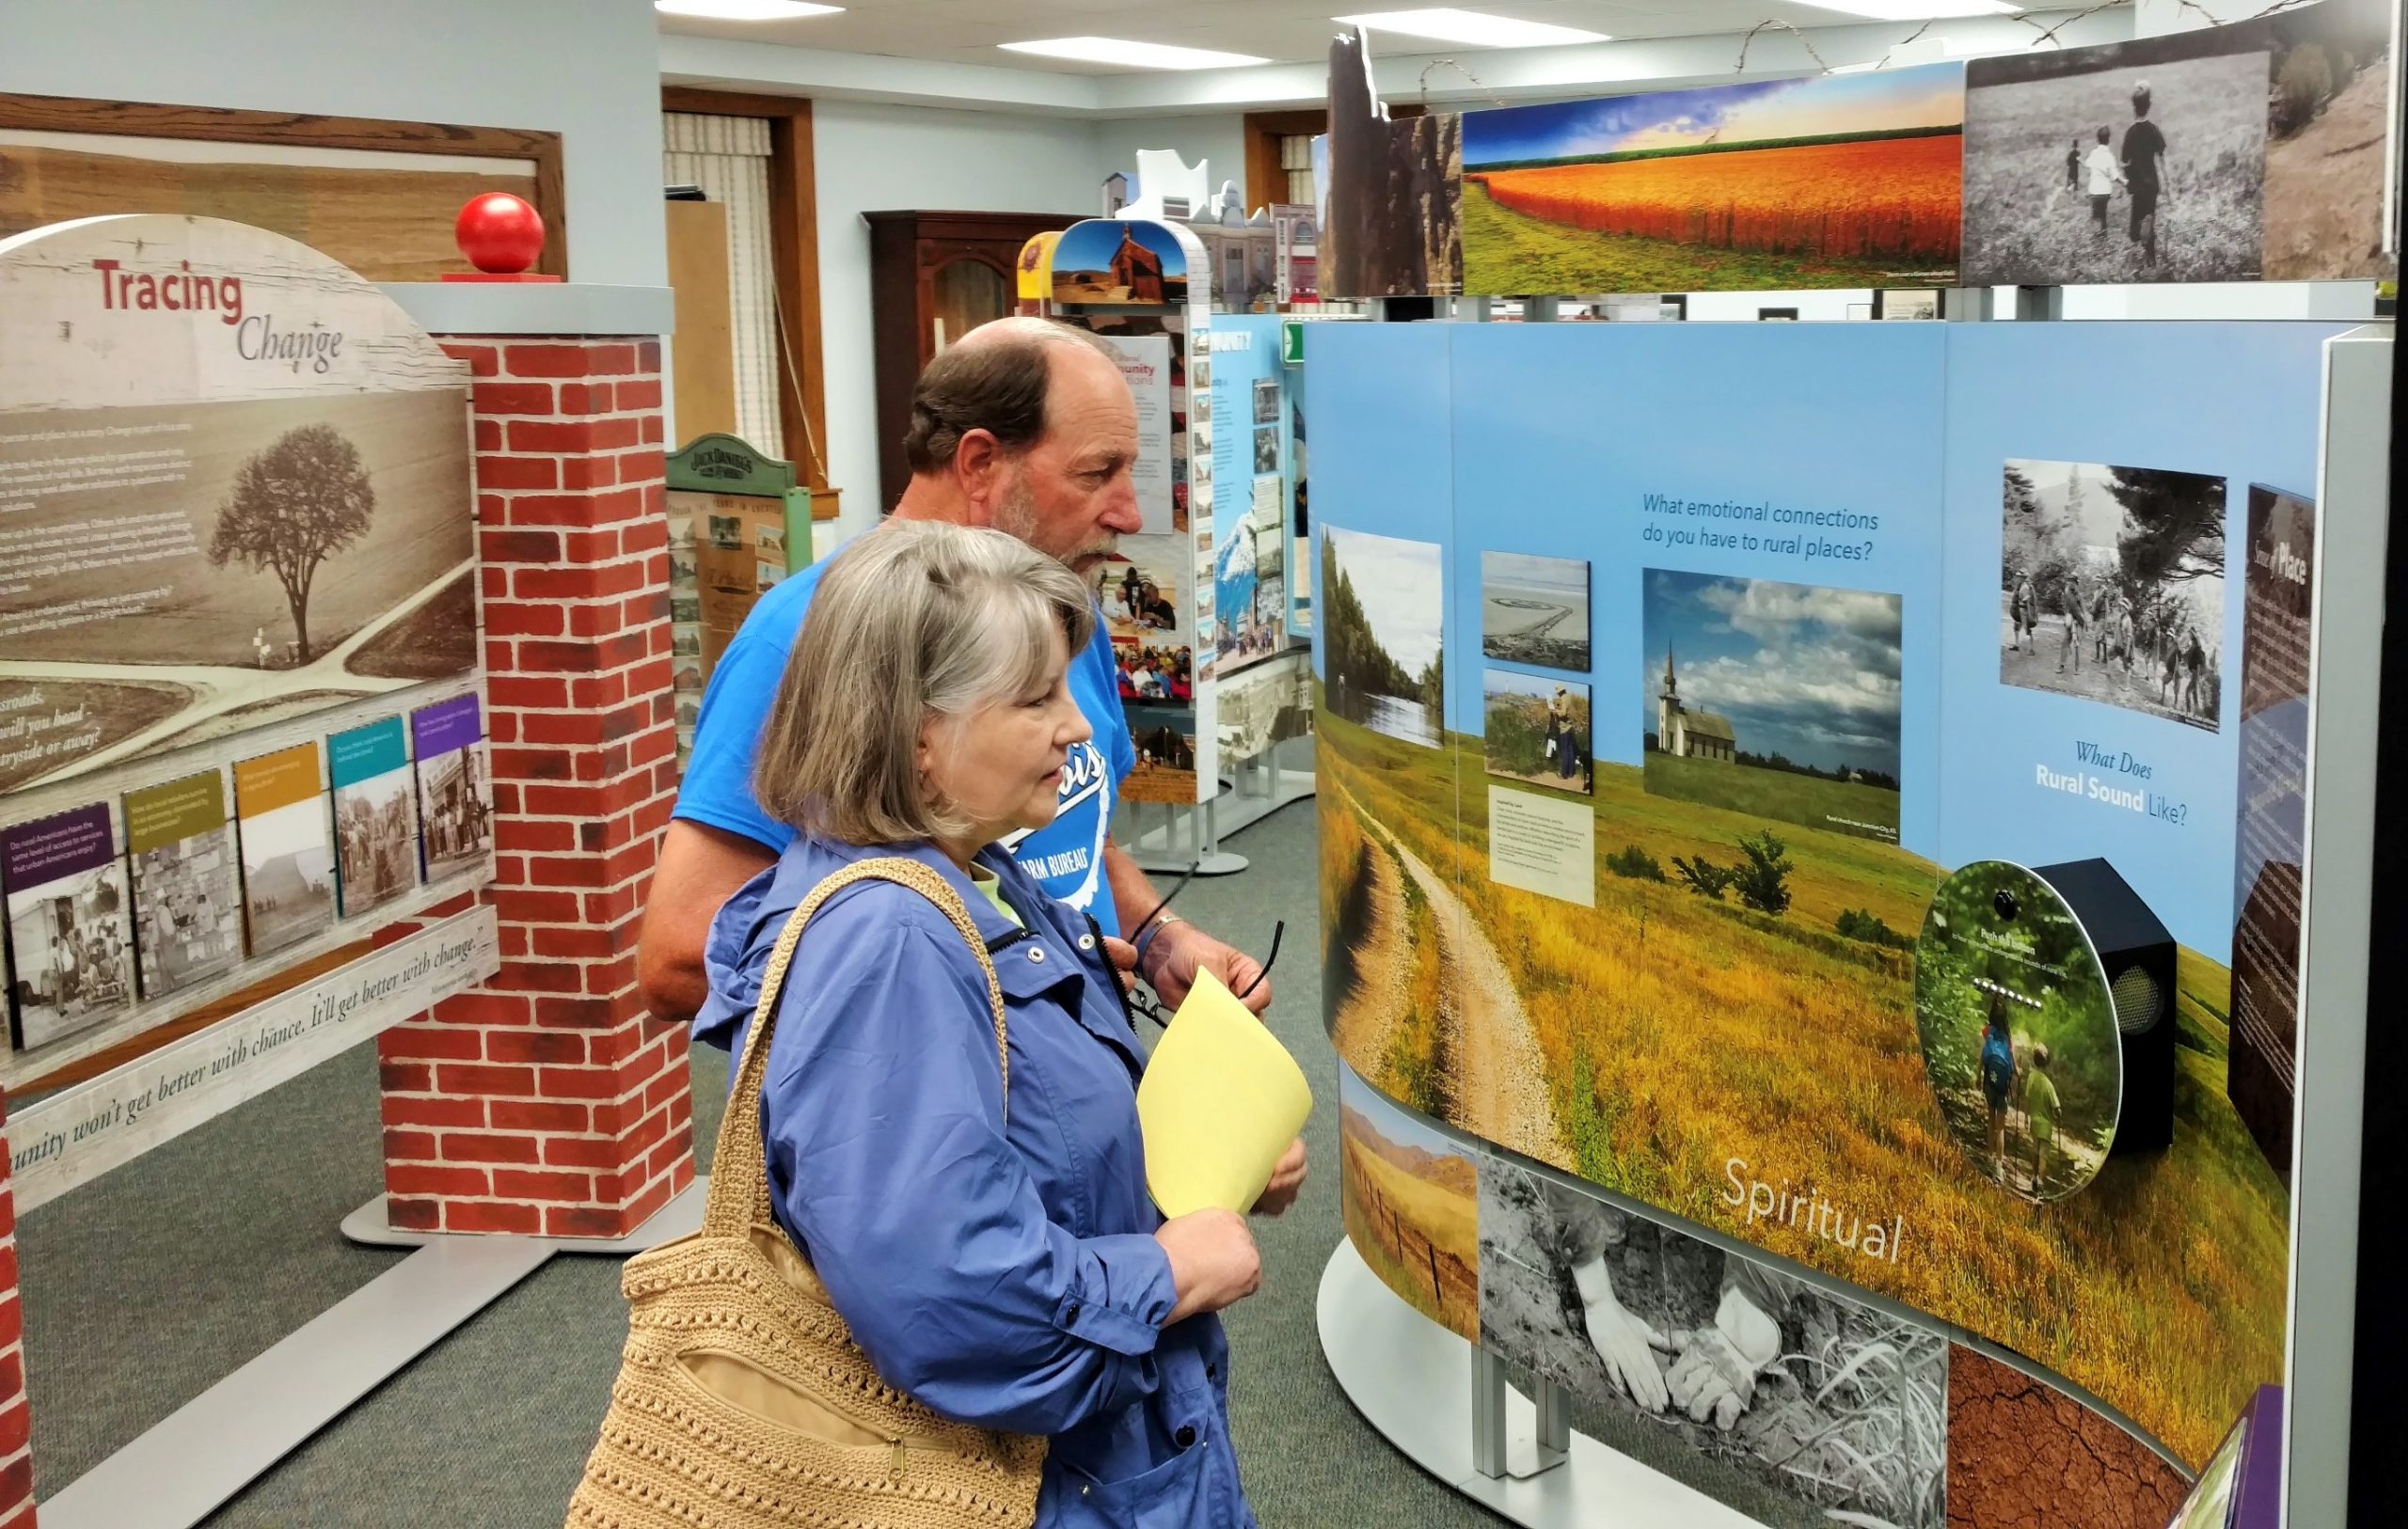 Photograph of two people viewing Crossroads, Chester Public Library.